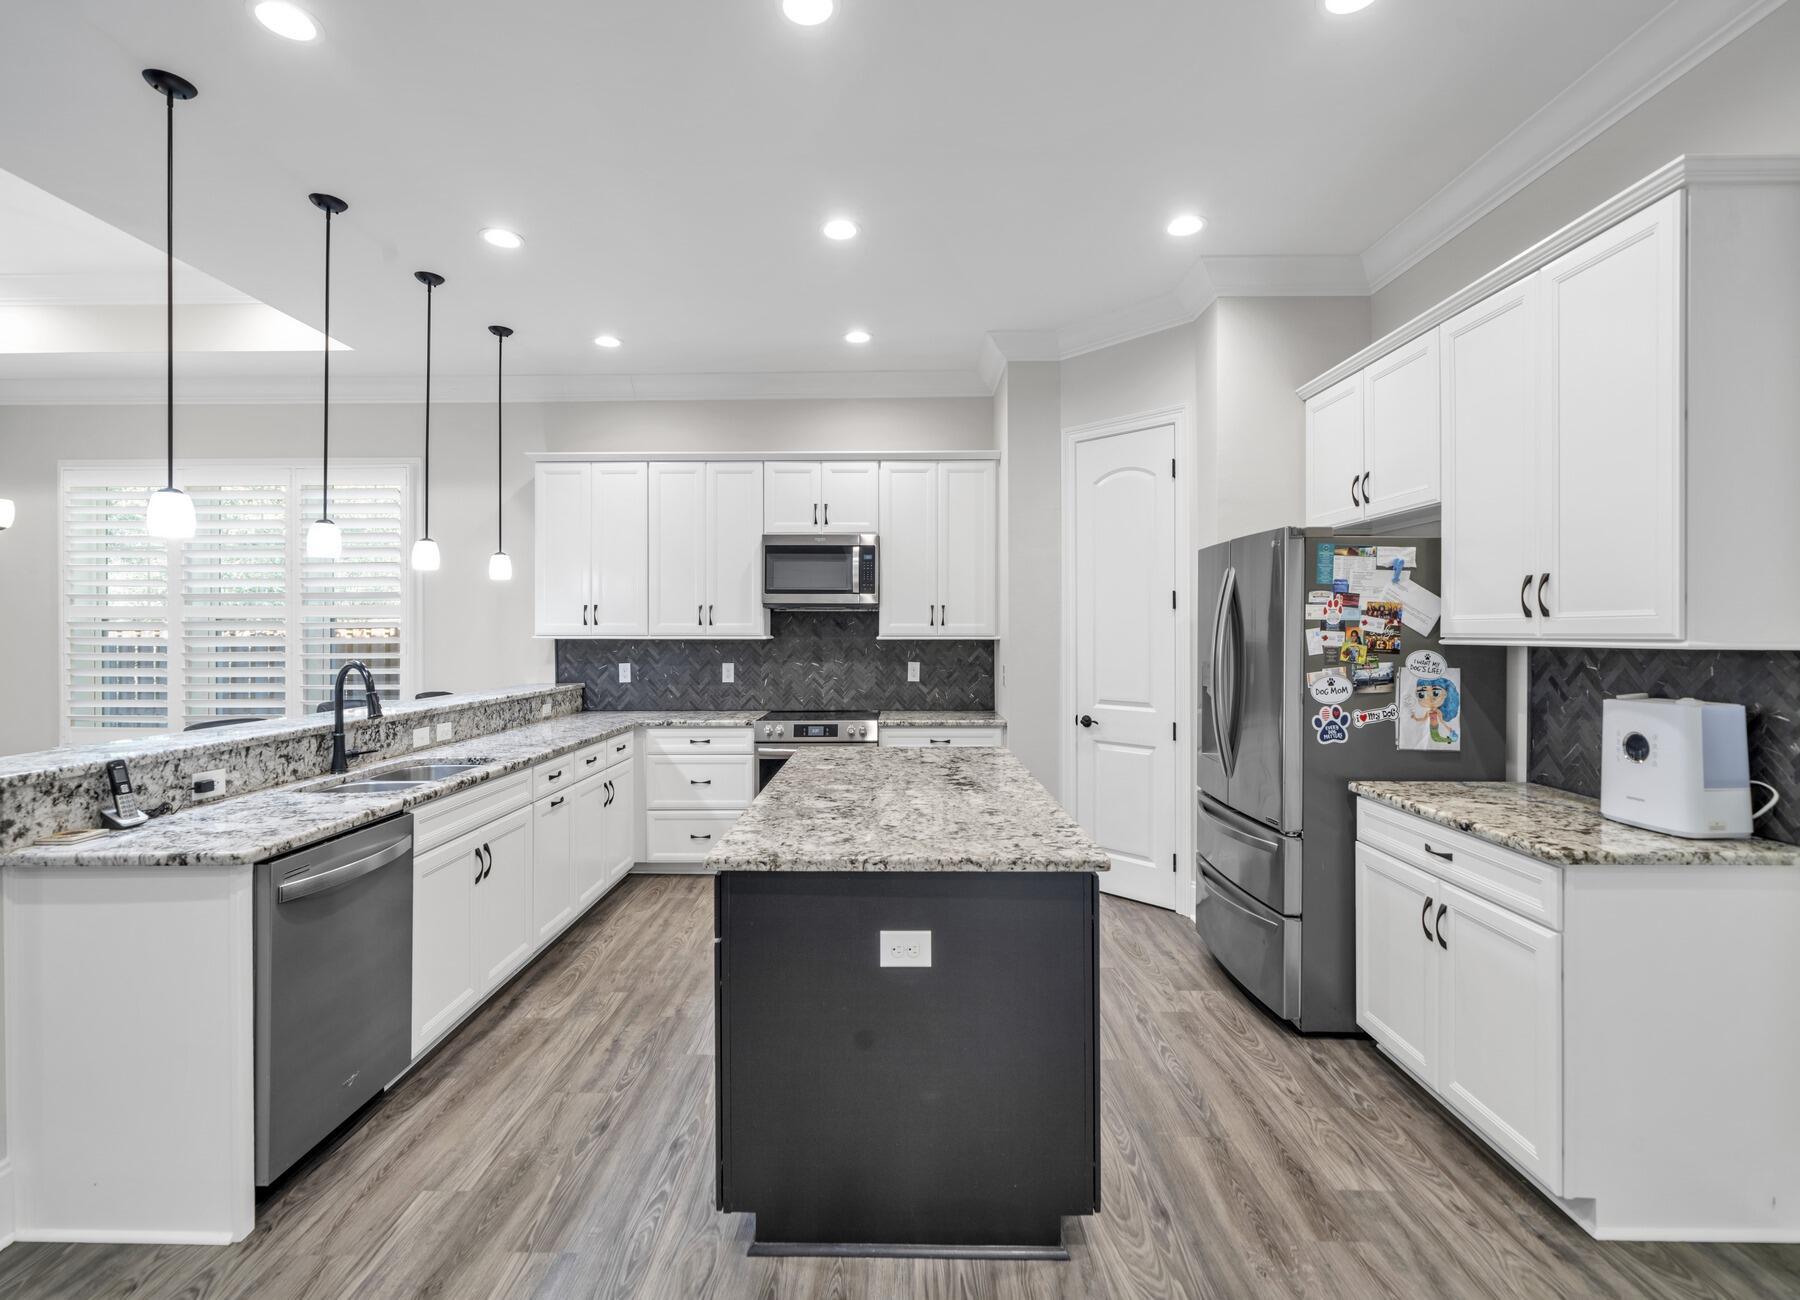 a large kitchen with stainless steel appliances kitchen island granite countertop a stove a sink dishwasher and a refrigerator with wooden floor